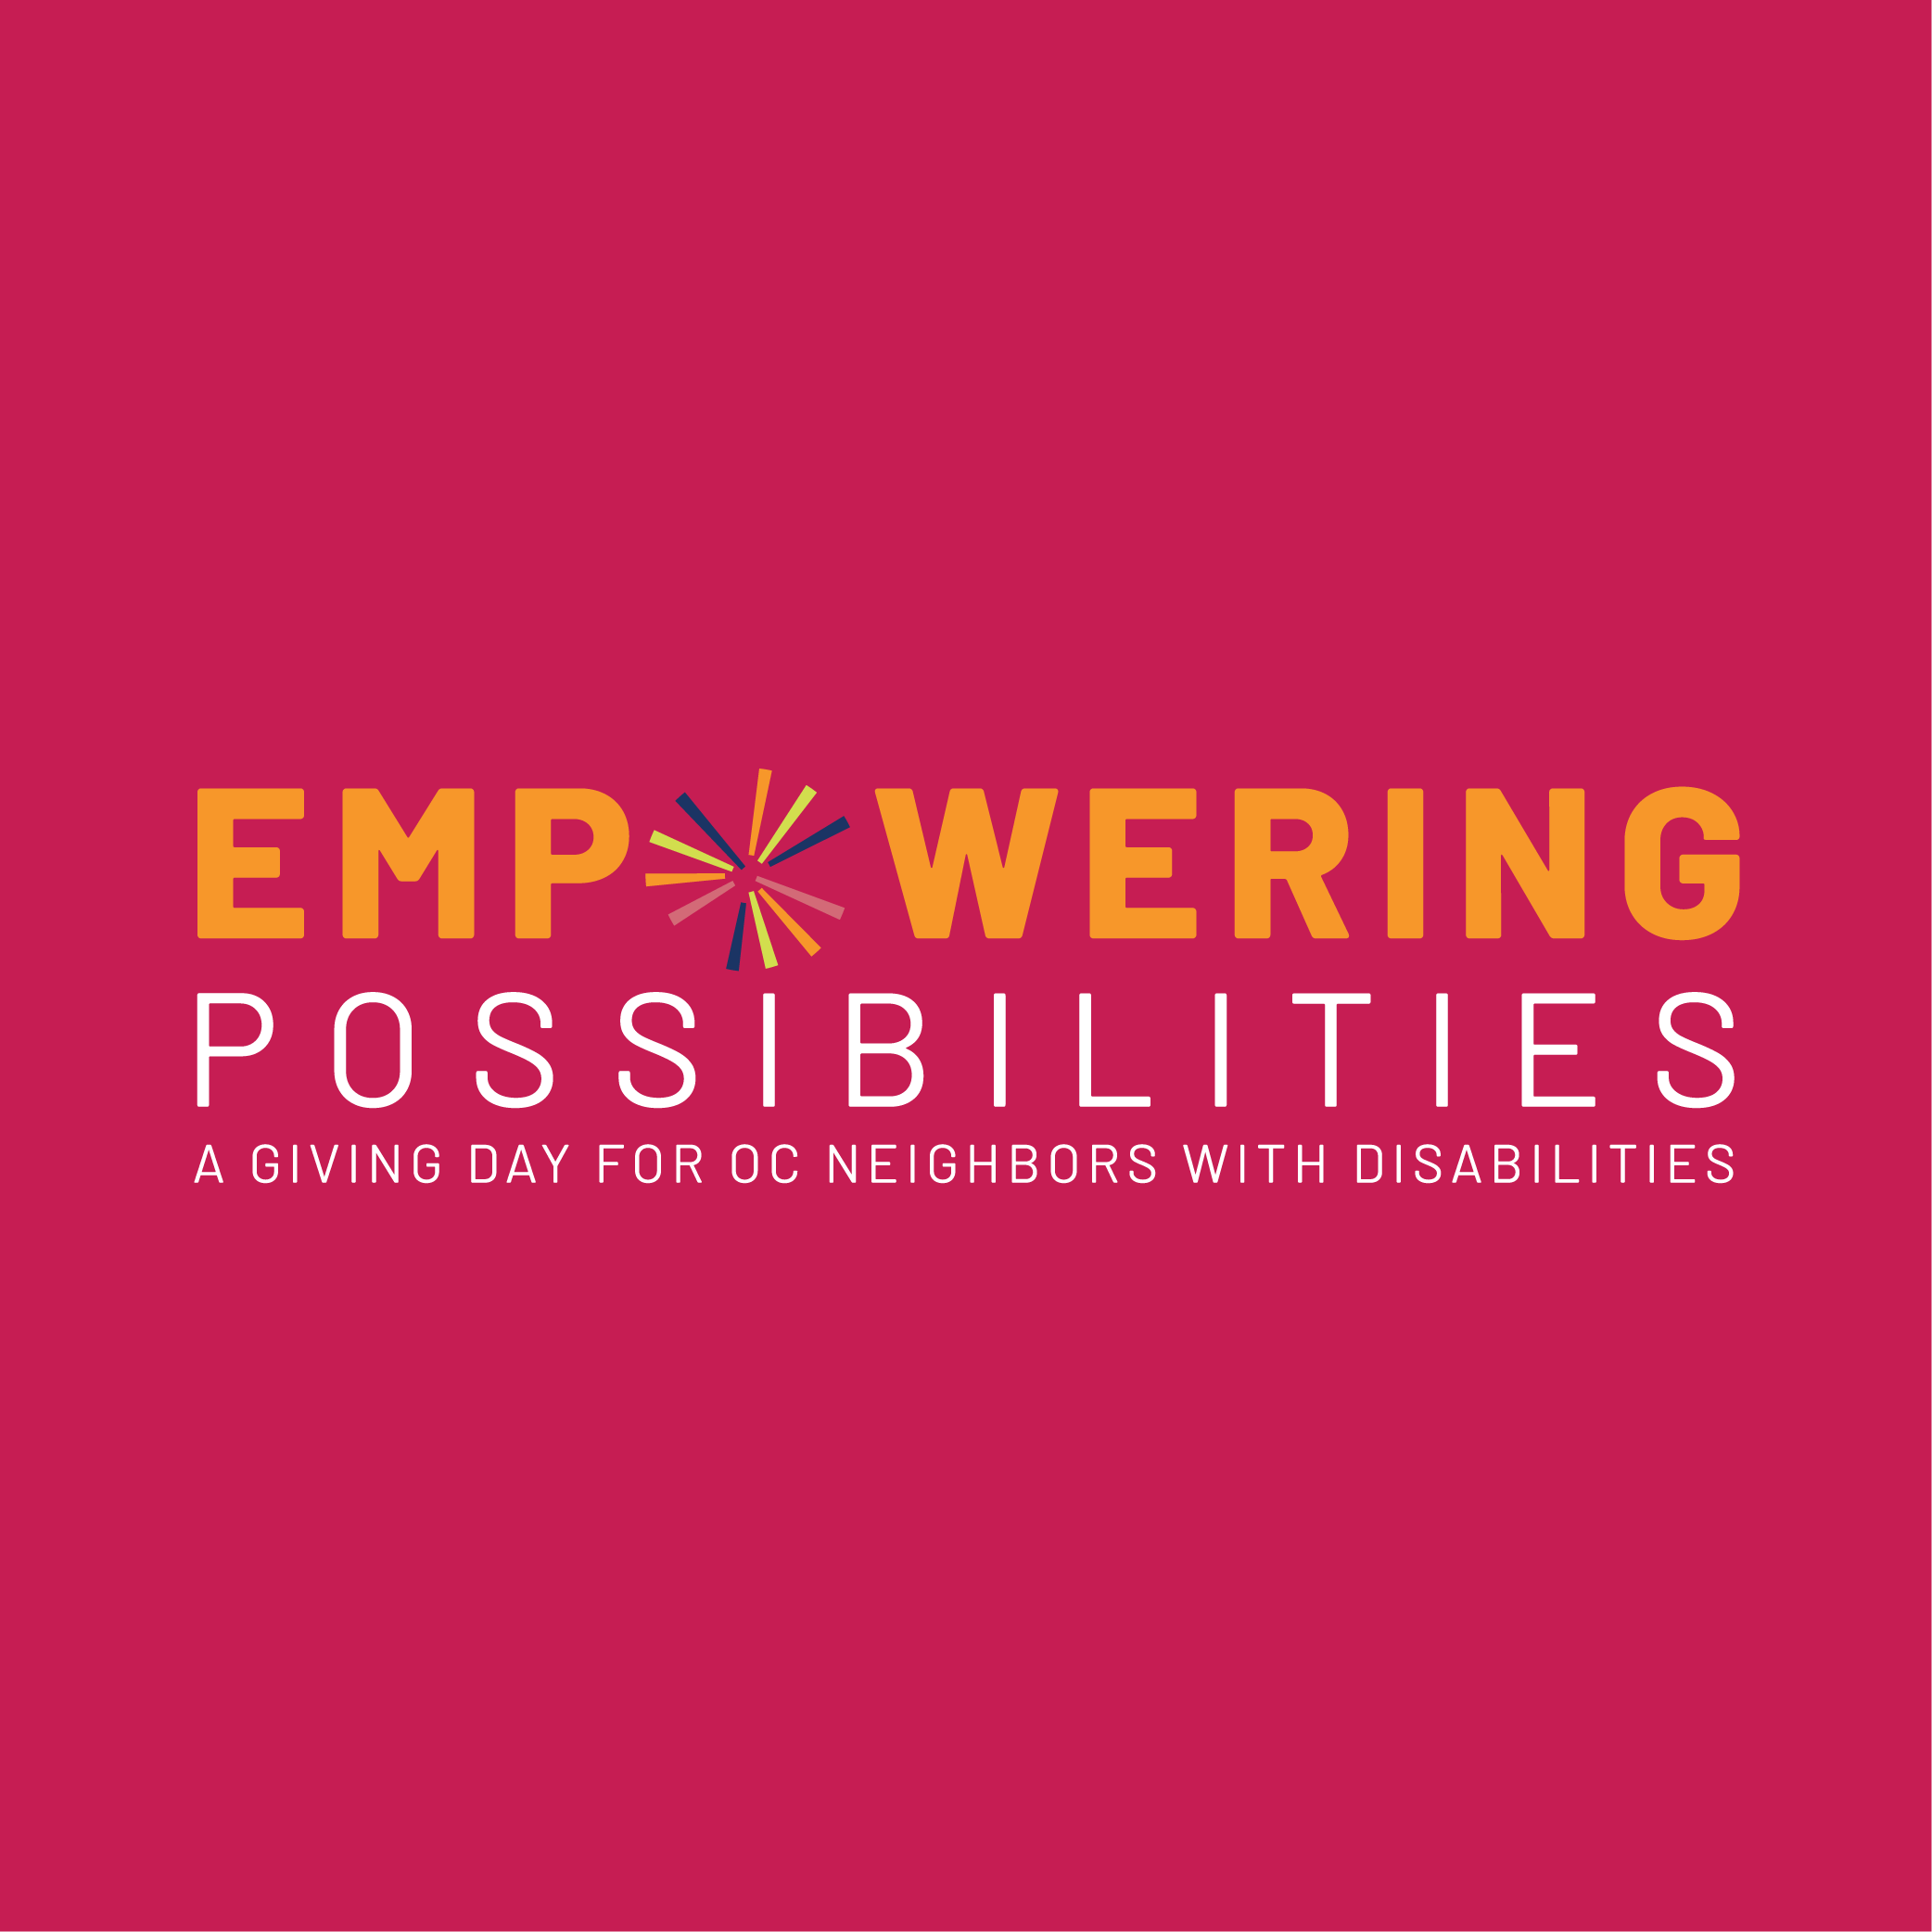 $150,496 Raised in 24 Hours During Empowering Possibilities Giving Day